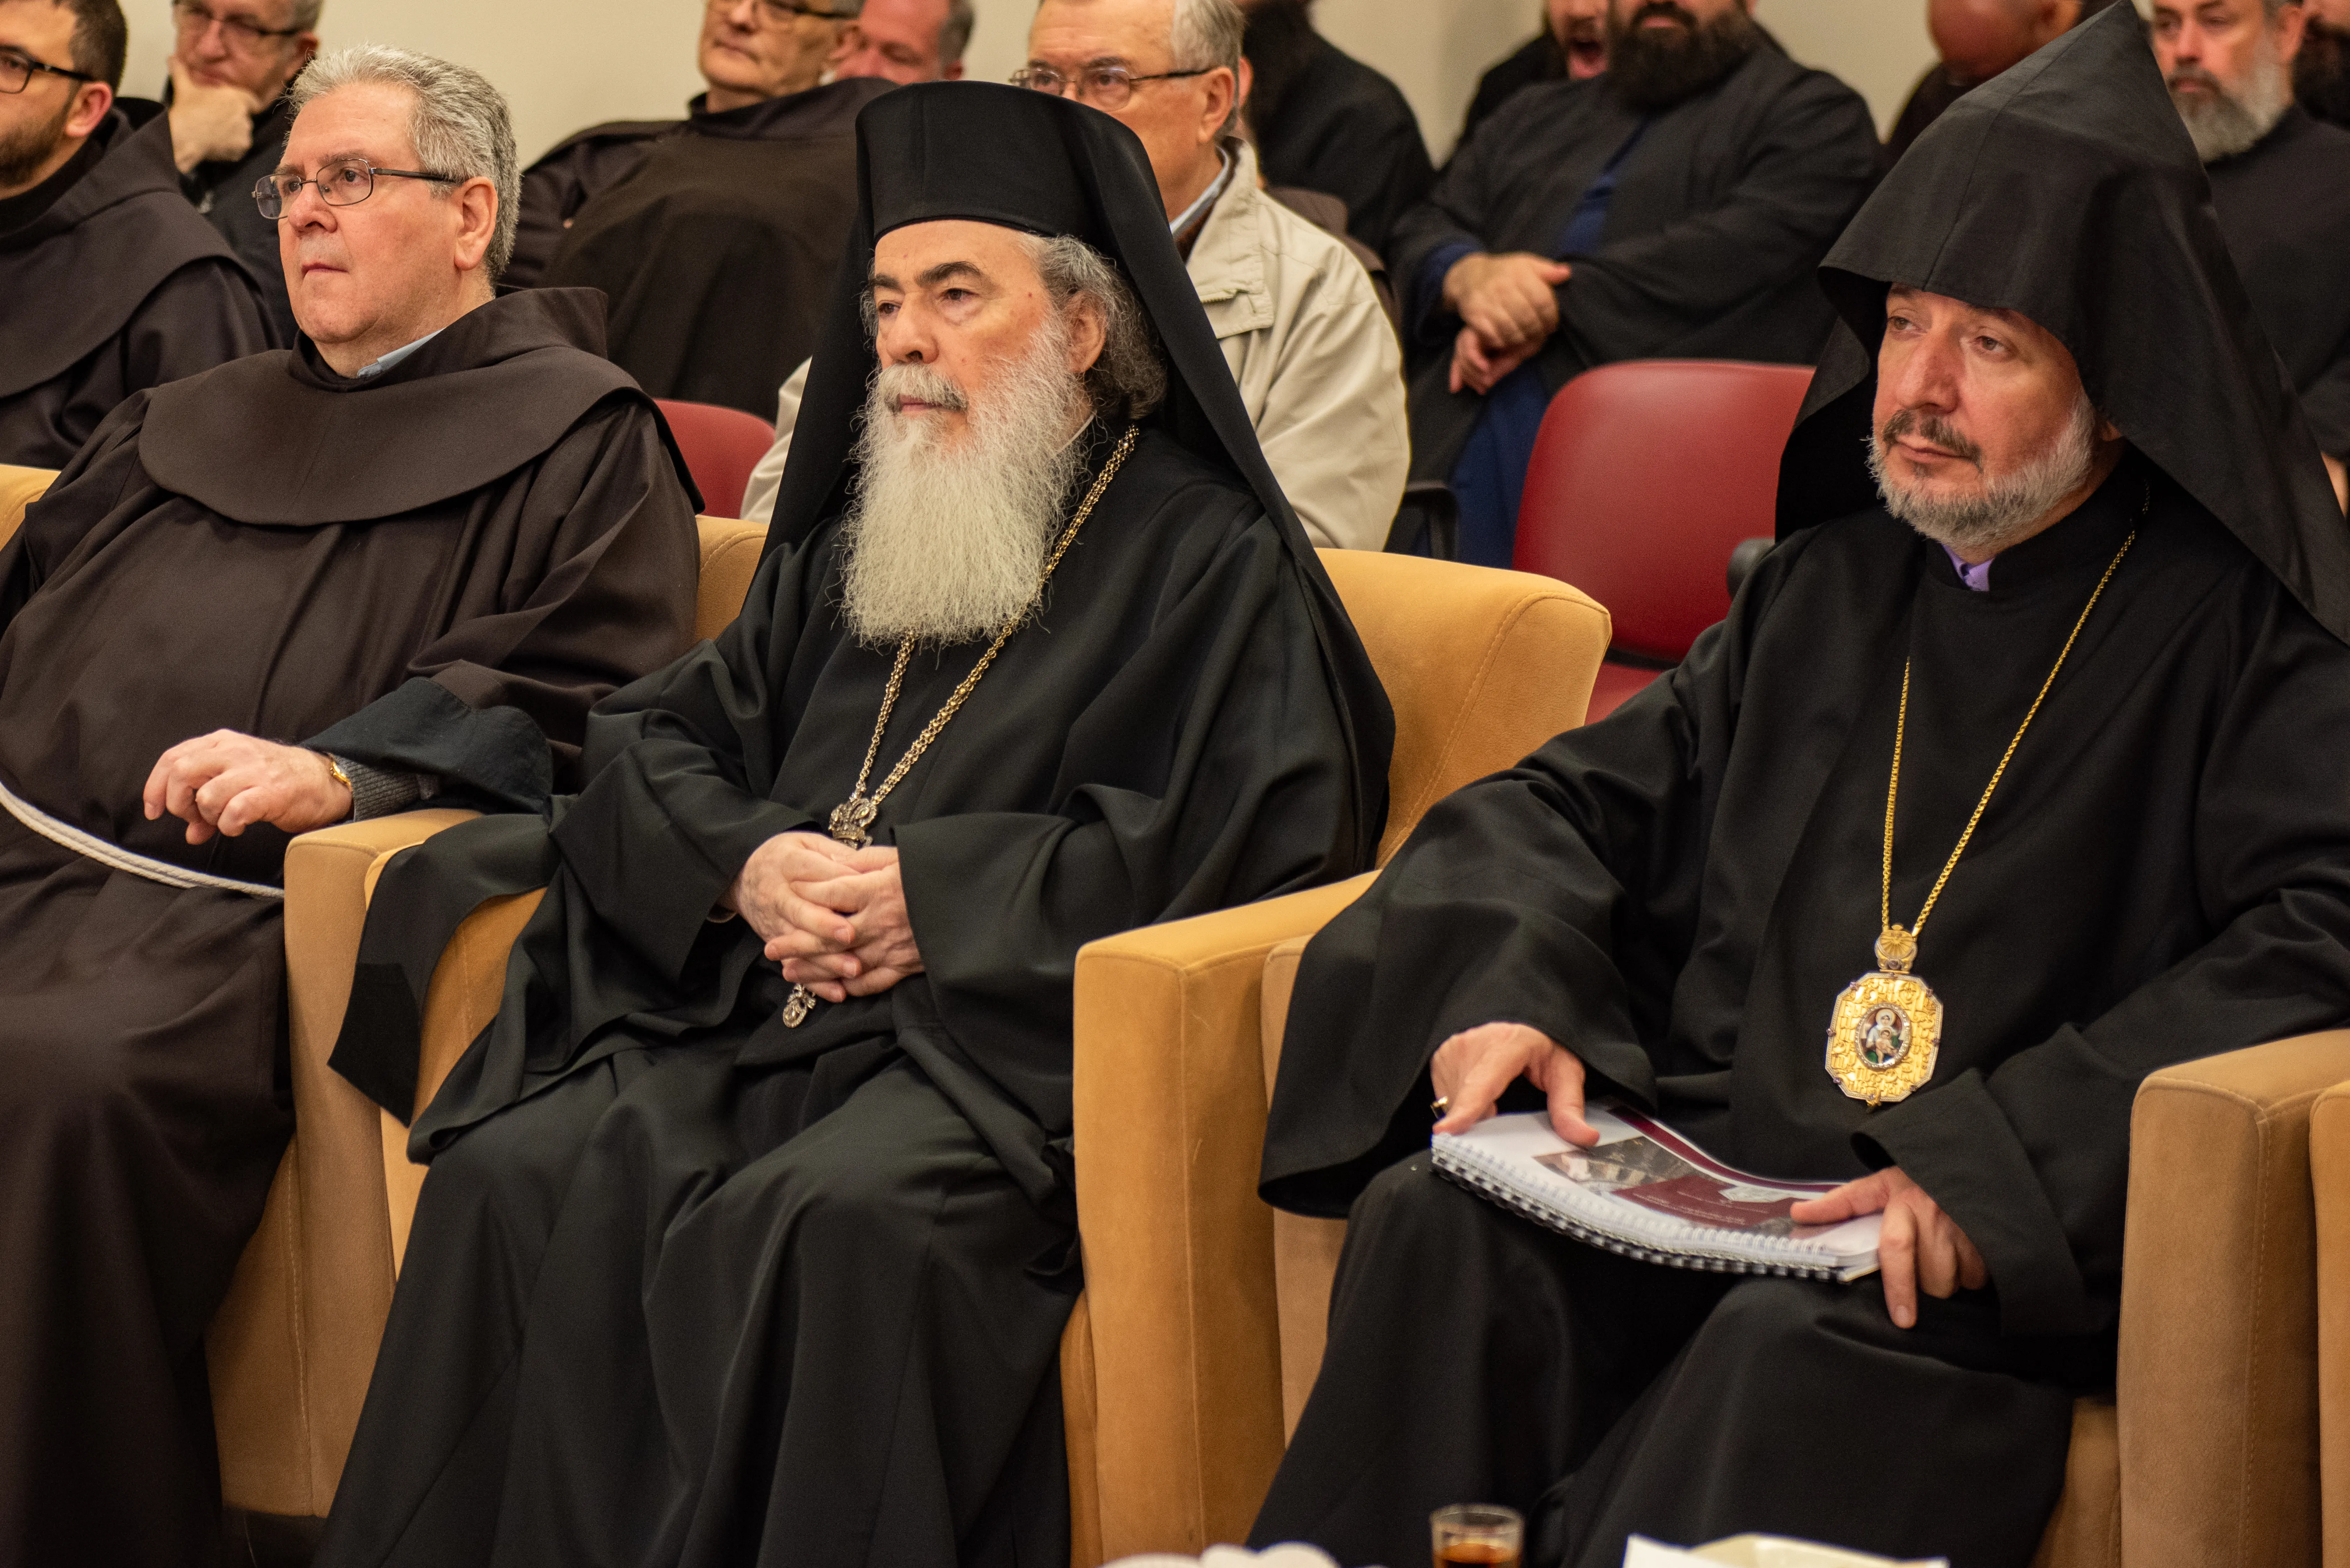 On Dec. 21, 2023, leaders of the three communities responsible for the Basilica of the Holy Sepulcher took part in a meeting for the presentation of the work in progress in the Holy Sepulcher in Jerusalem in 2023. From left to right: Father Francesco Patton, custos of the Holy Land; H. B. Theophilos III, Greek Orthodox patriarch of Jerusalem; and H. B. Nourhan Manougian, Armenian Patriarch of Jerusalem.?w=200&h=150